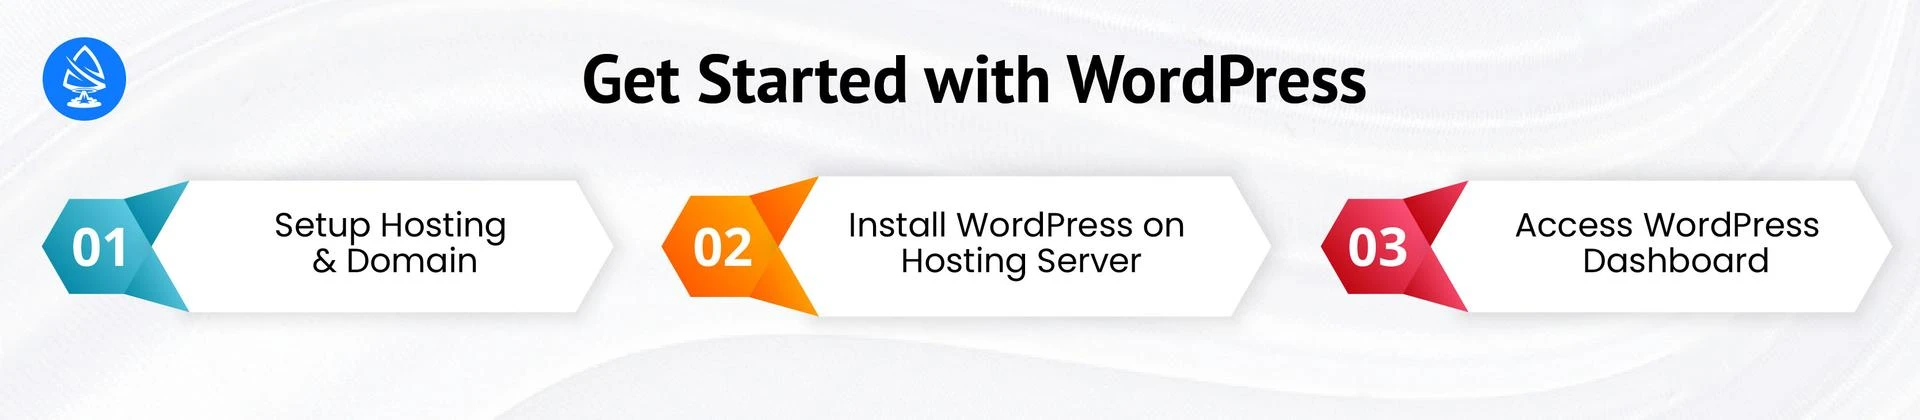 Getting Started with WordPress 